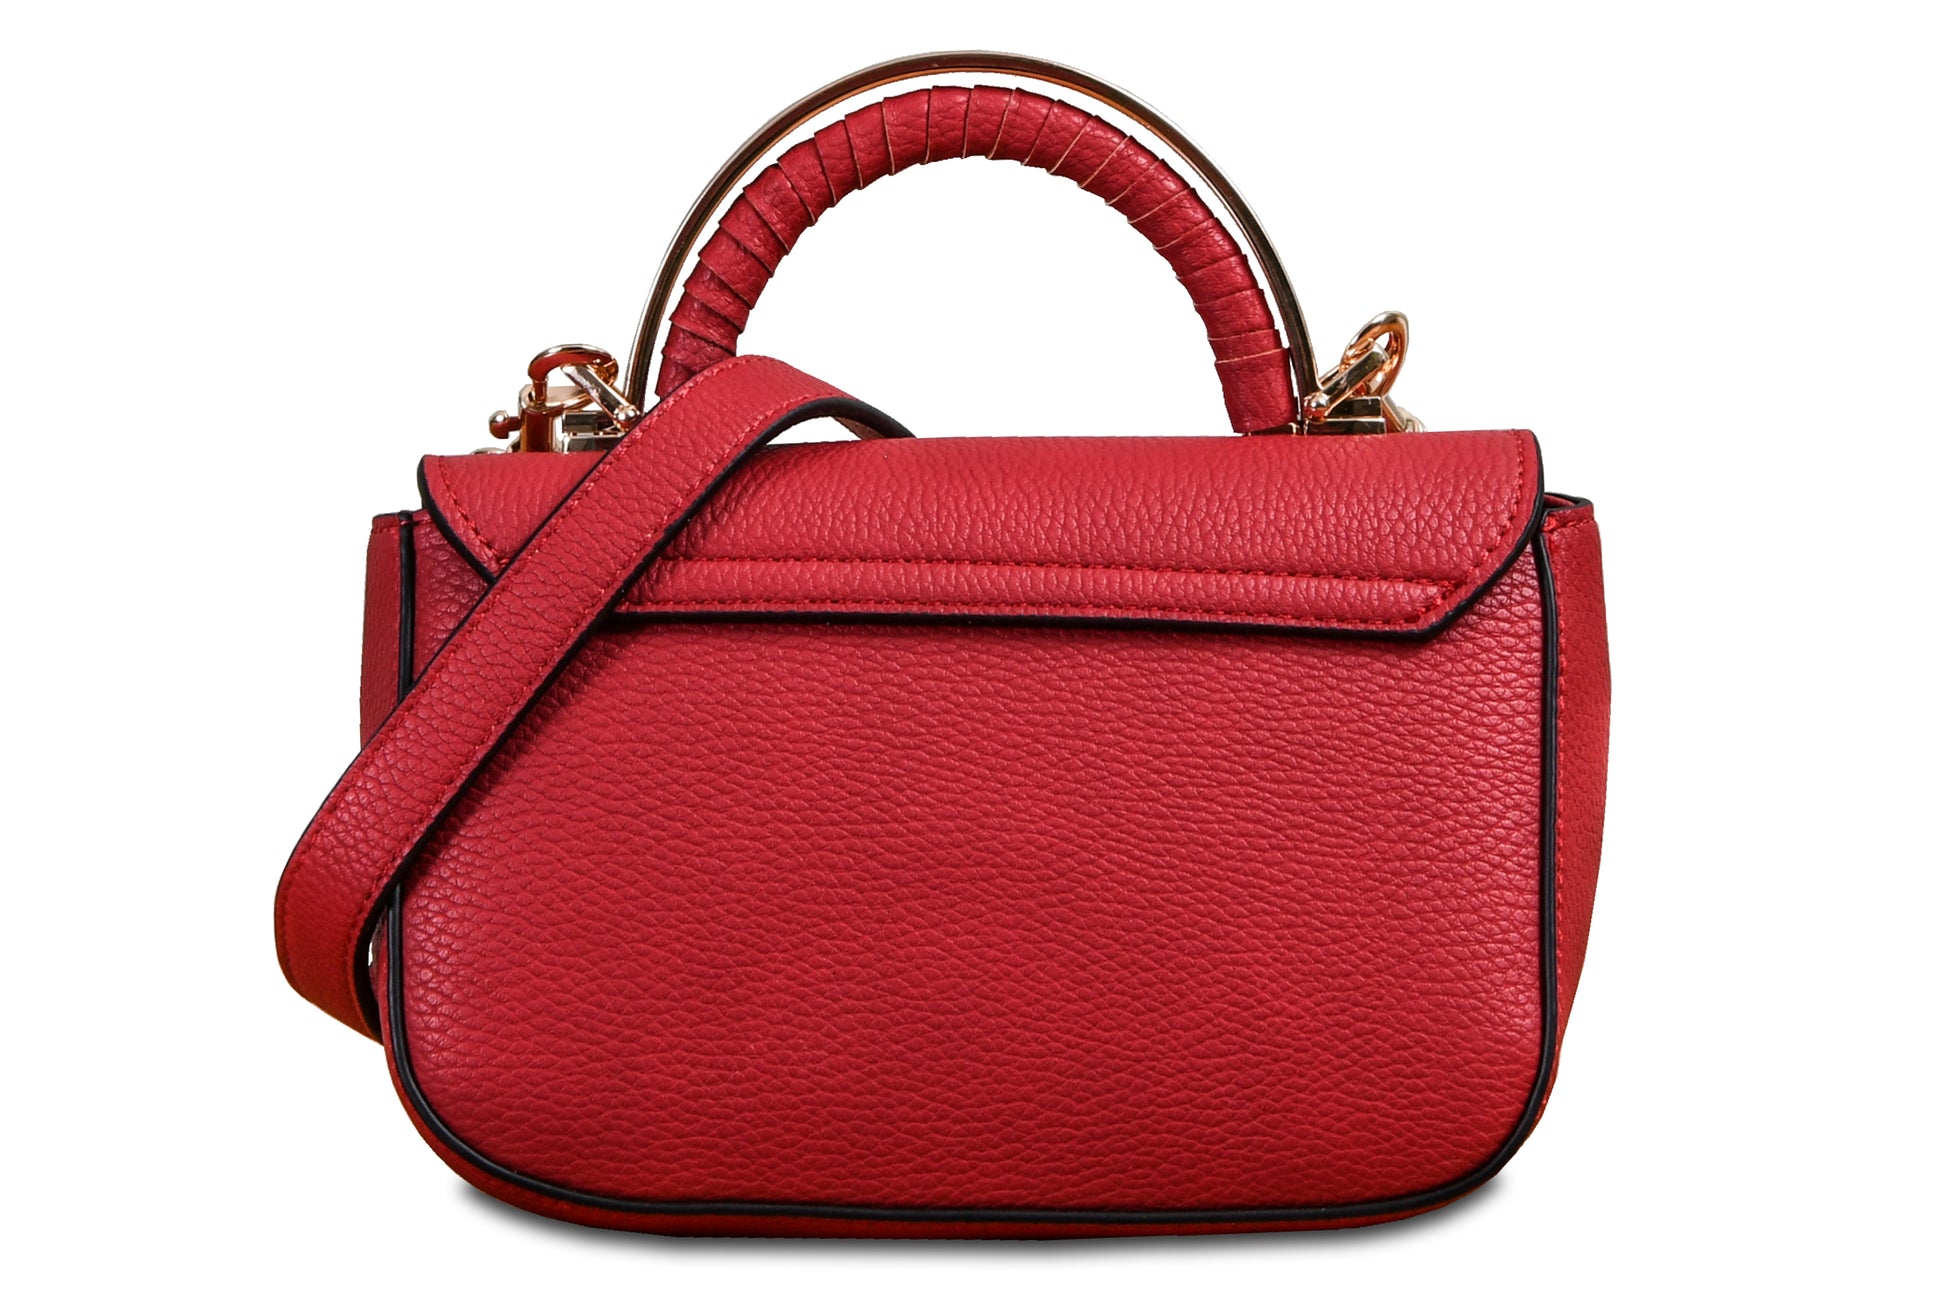 Mini Crossbody Pebble Grain Faux Leather Scarlet Red Handbag made by Dewi Maya back view available at the best boutique in Upstate South Carolina Spartanburg Greenville Dewi Maya Boutique